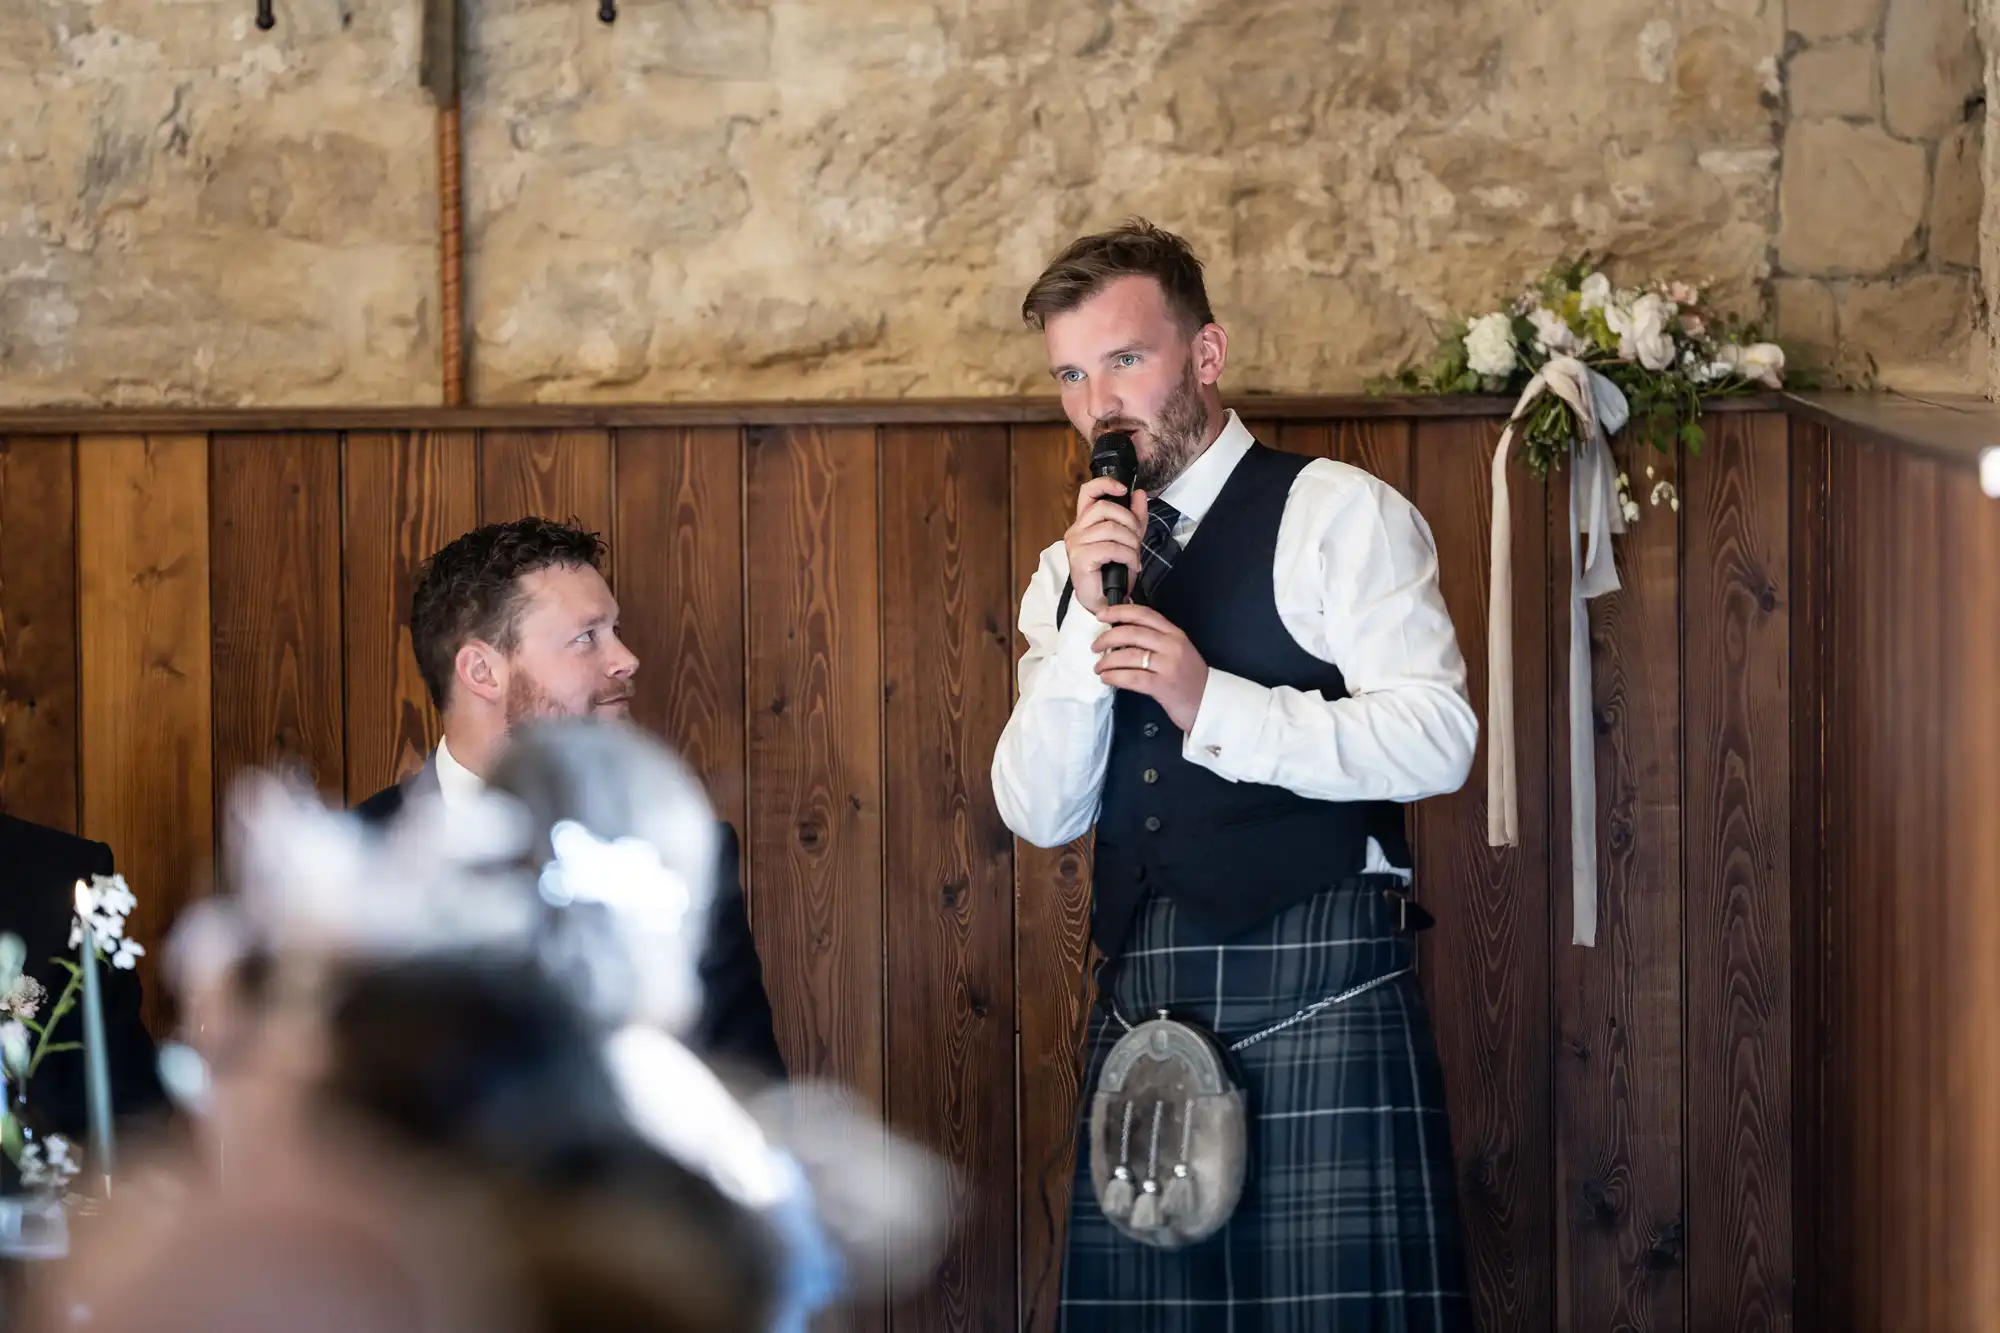 Man in a kilt giving a speech at a wedding, holding a microphone, with another man seated nearby, in a rustic stone and wood-paneled room.